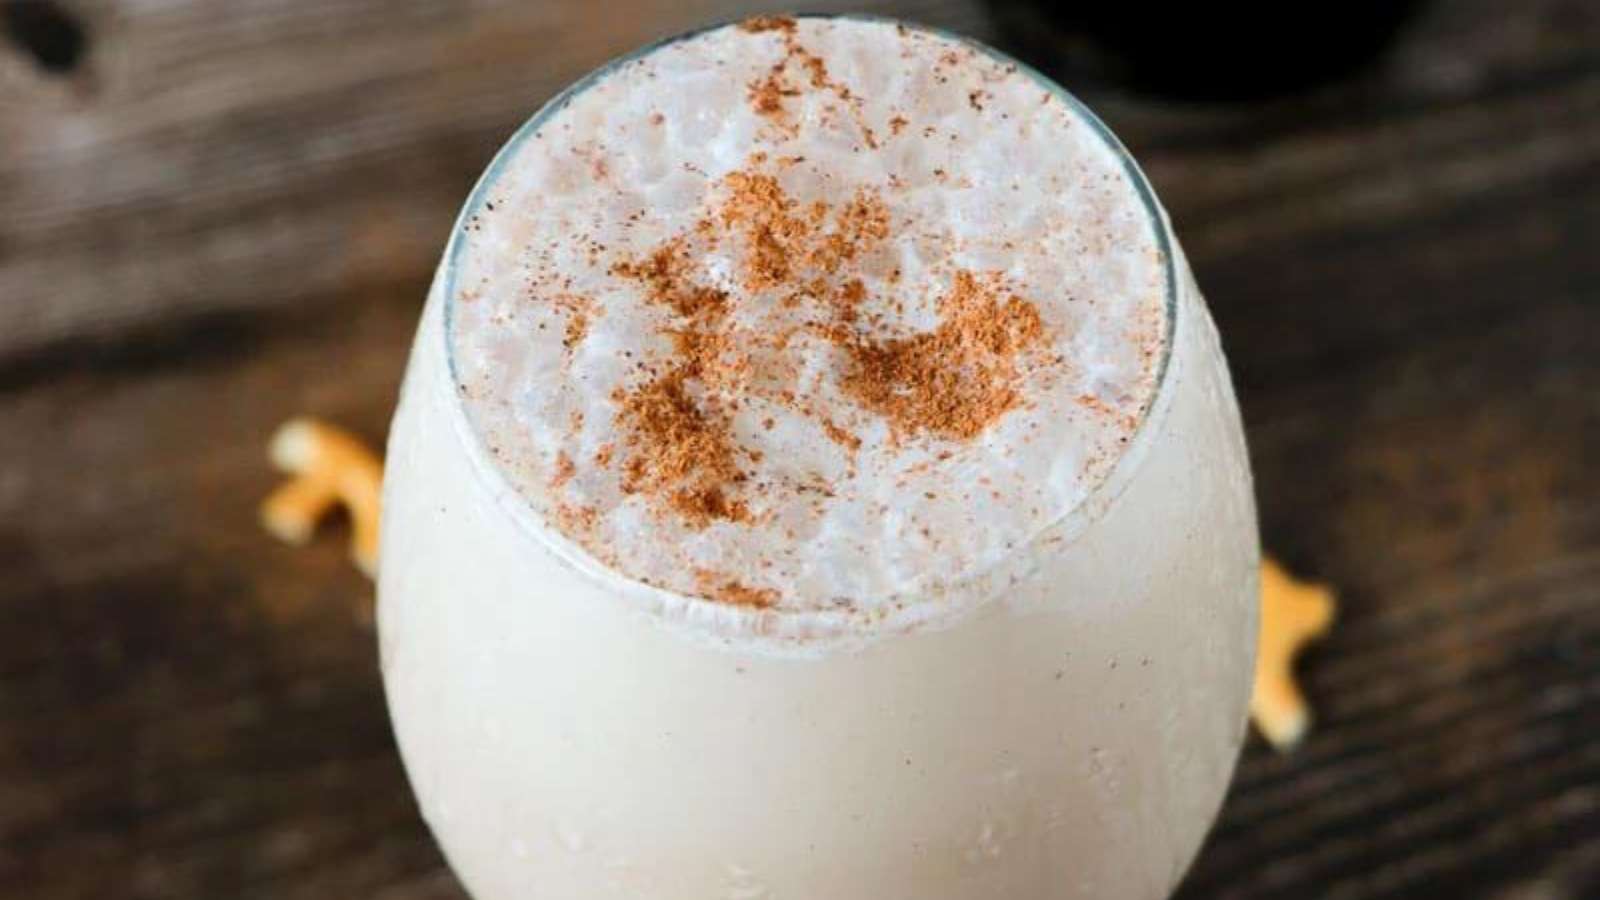 A spiced drink with cinnamon and nutmeg on a wooden table.